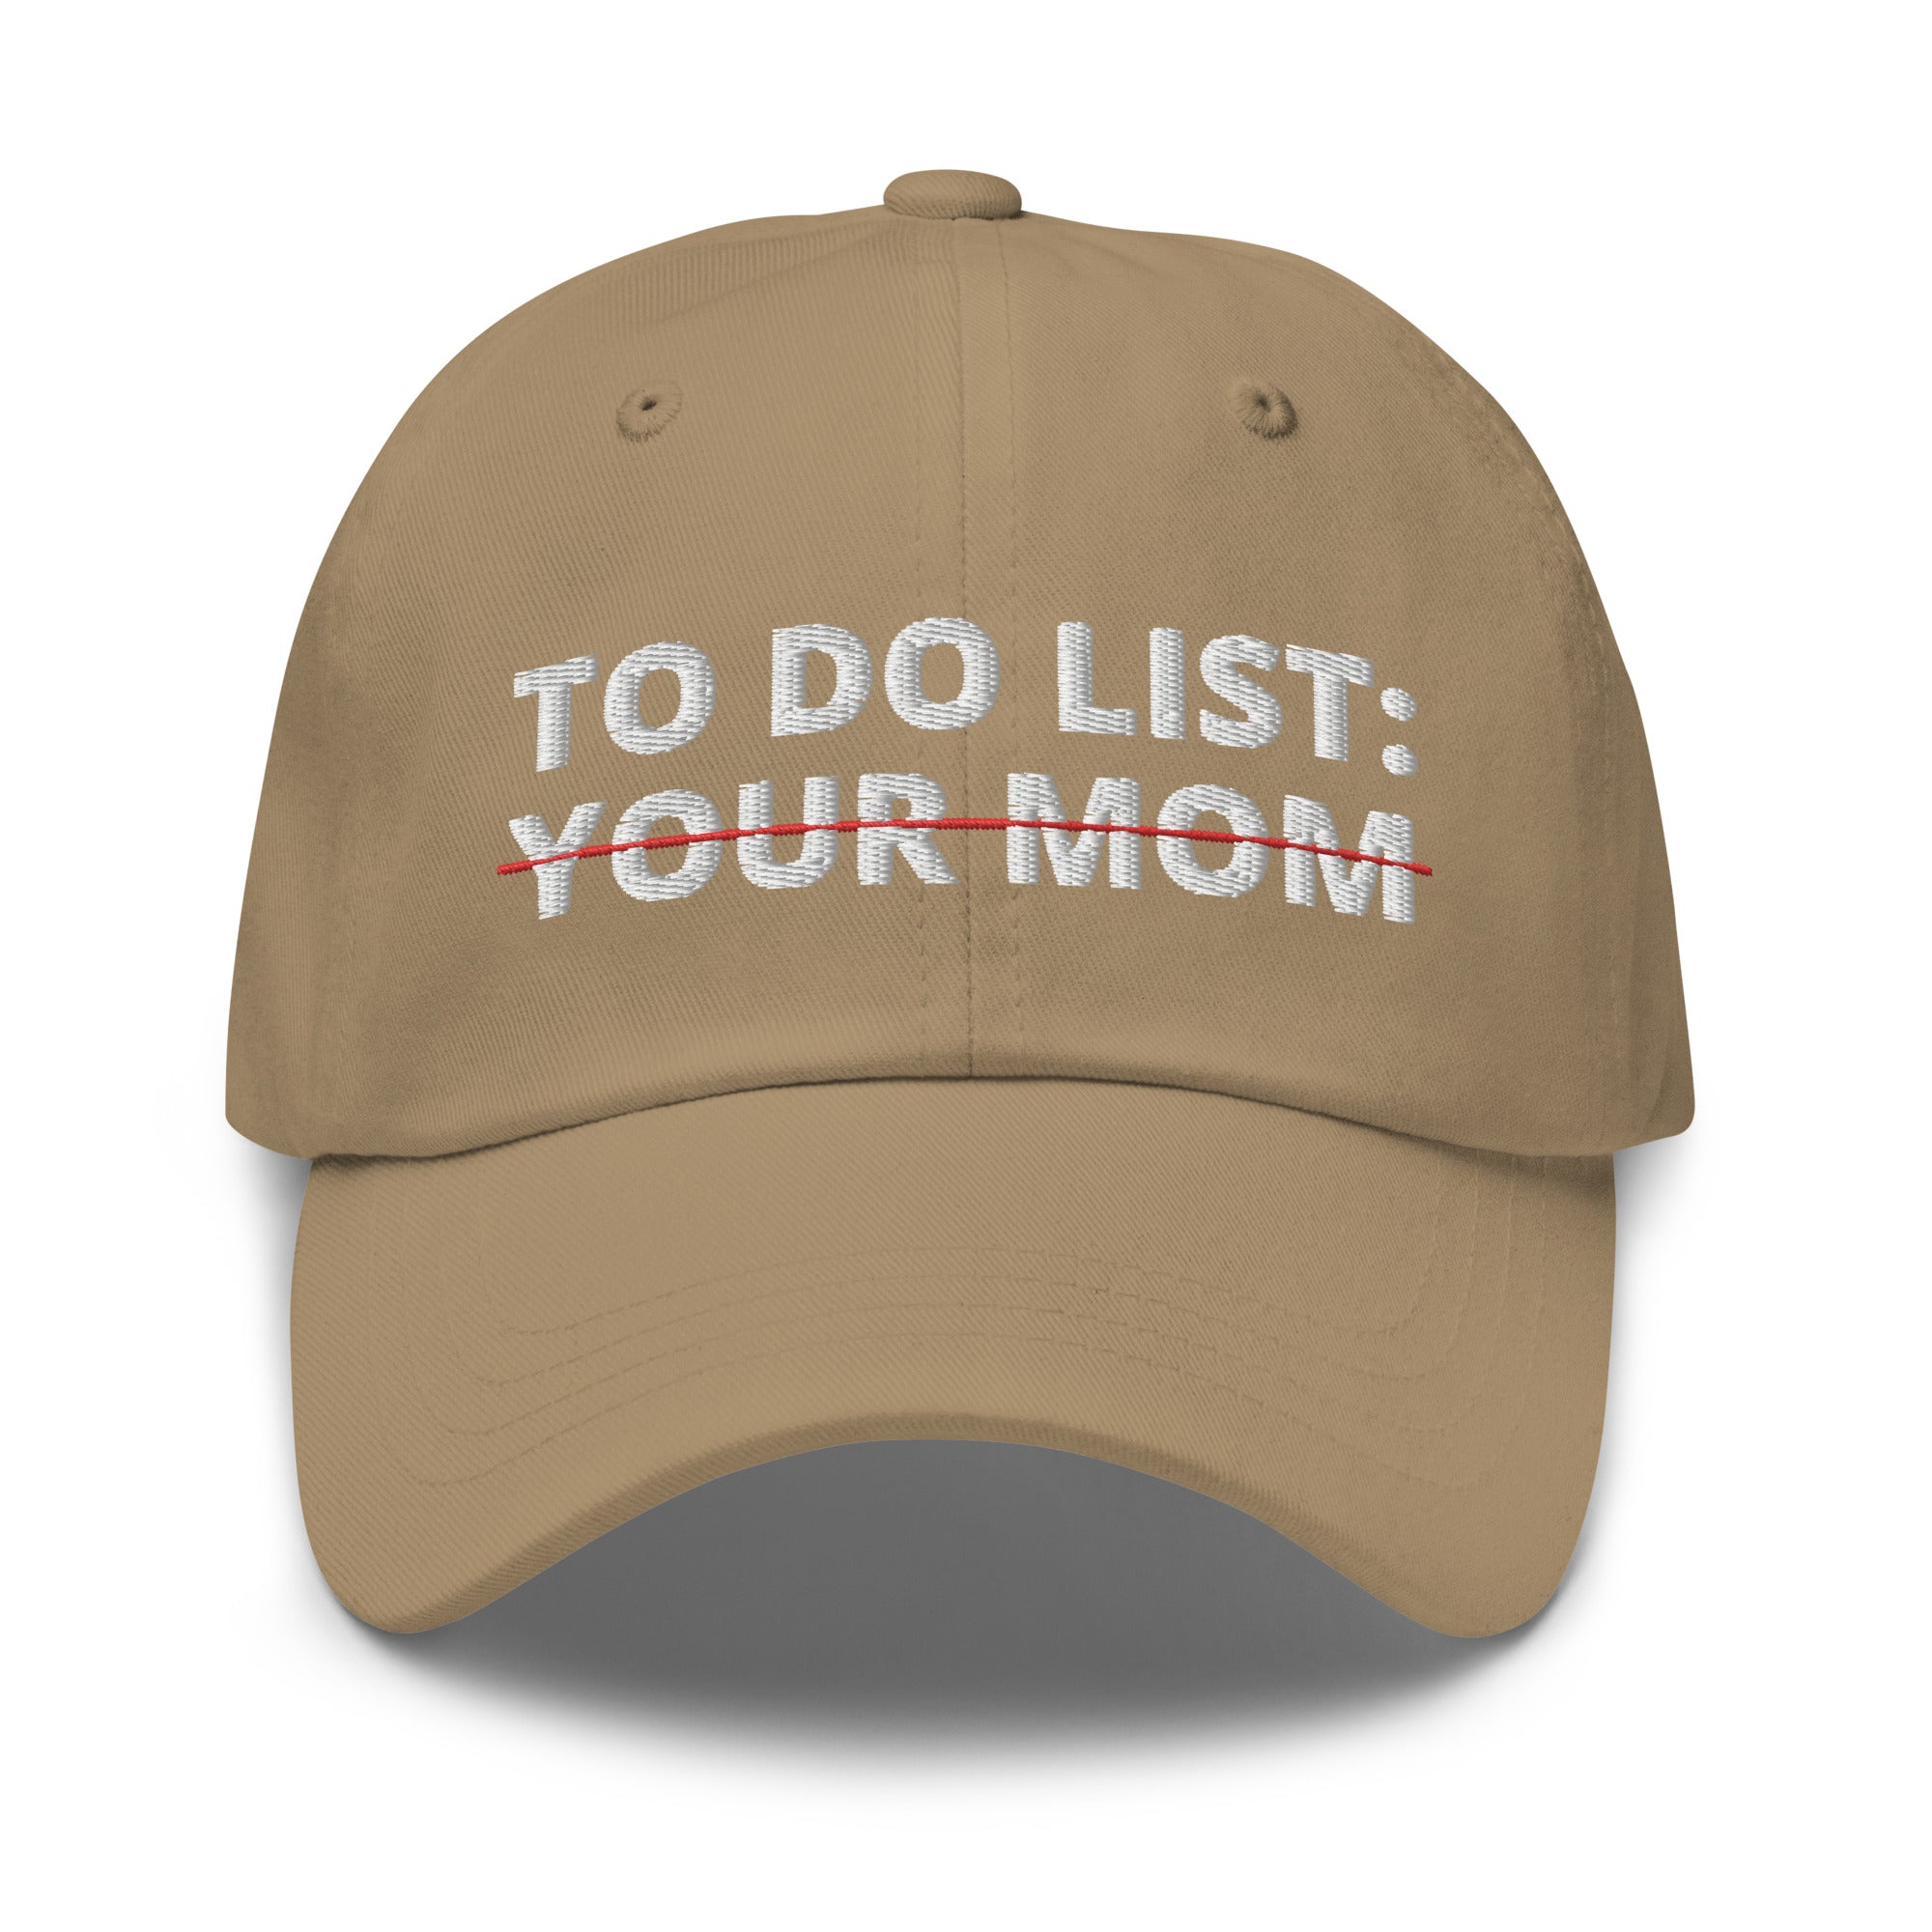 To Do List Your Mom Hat, Funny To Do List, Sarcastic To Do List, Sarcastic Gifts, Adult Humor Hat, Your Mom Cap, Funny Mom Jokes, Funny Hats - Madeinsea©